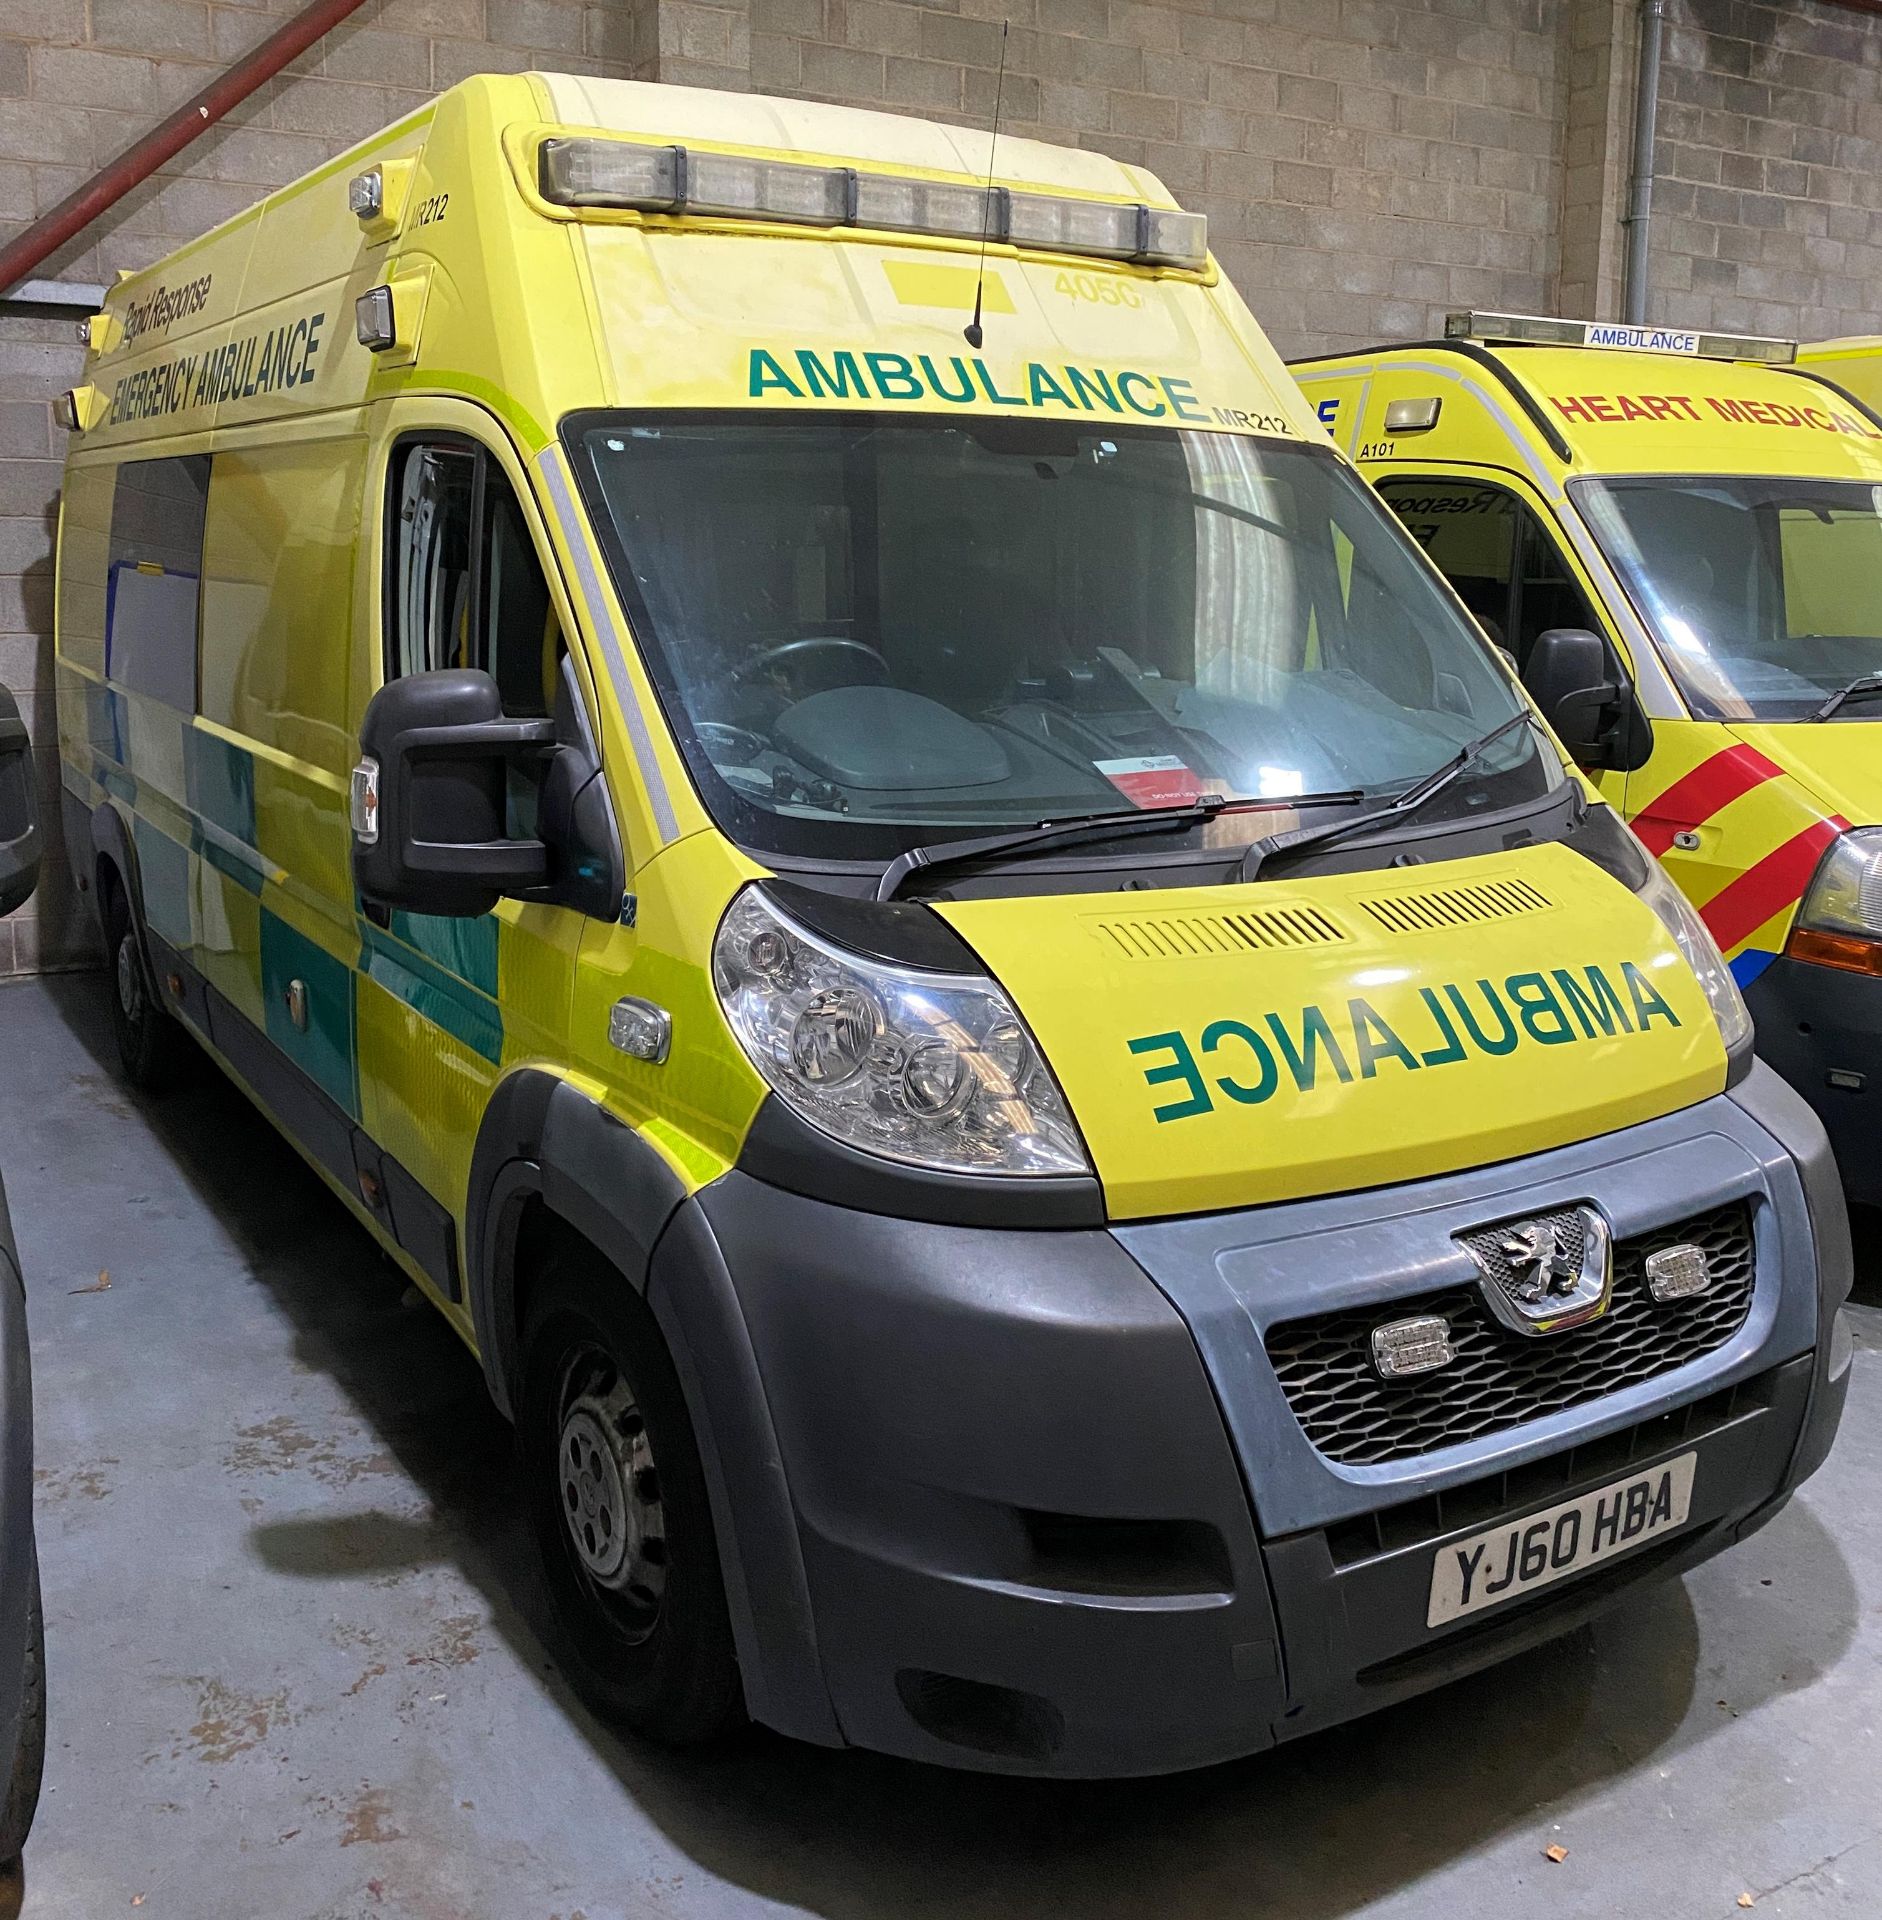 PEUGEOT BOXER 440 L4H3 HDI VAN LIVERIED UP AS AN AMBULANCE - Diesel - Yellow. - Image 2 of 26